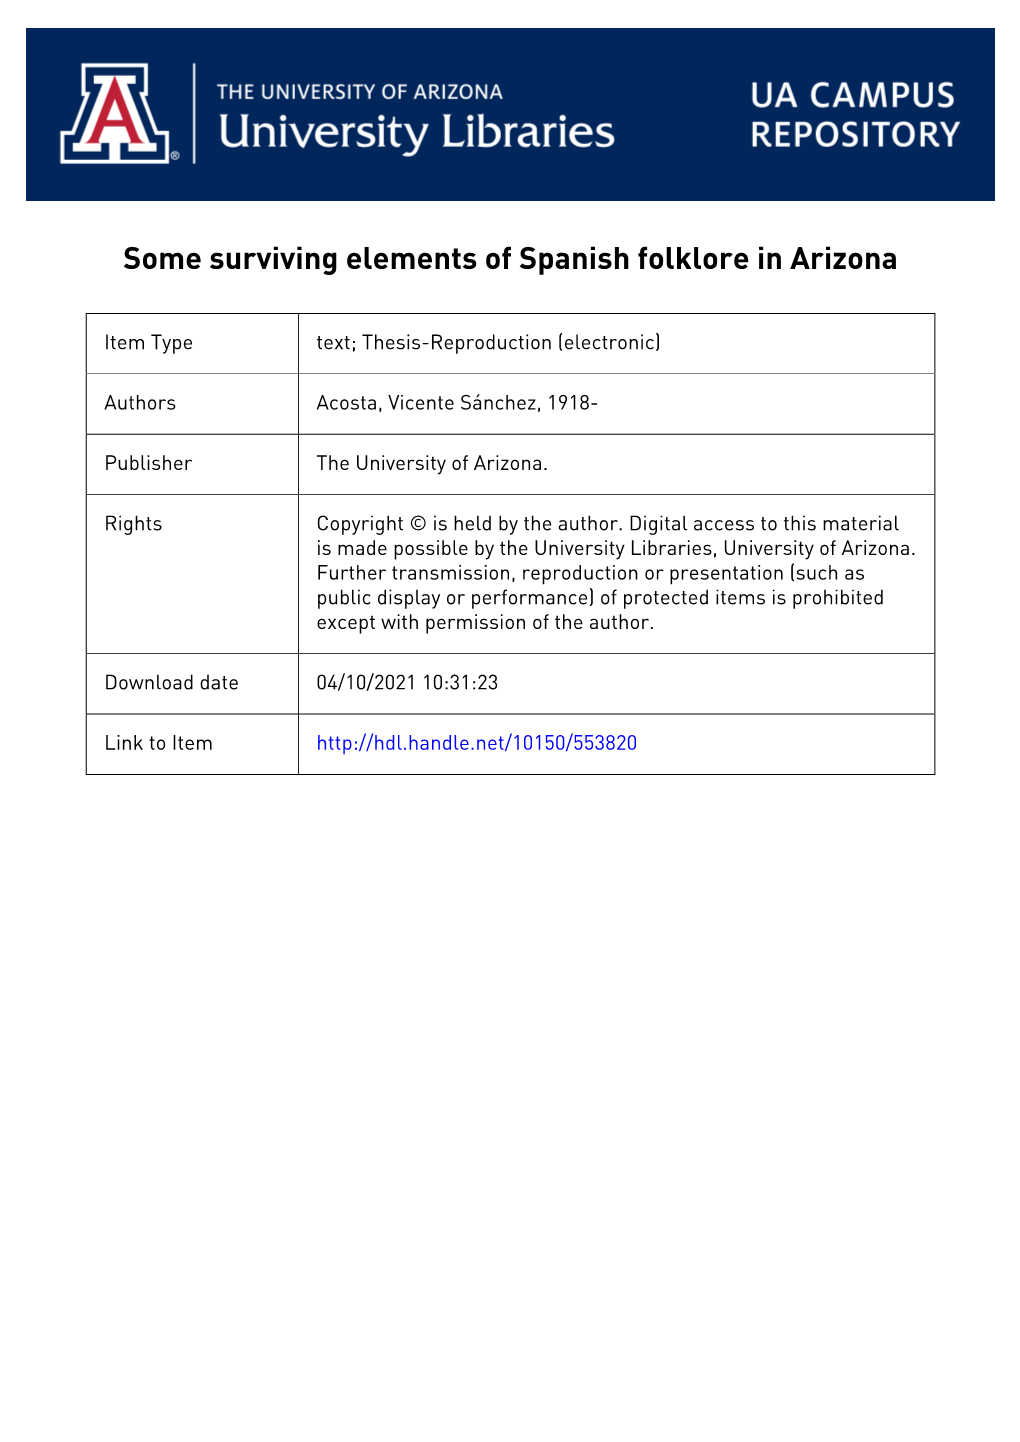 Some Surviving Elements of Spanish Folklore in Arizona